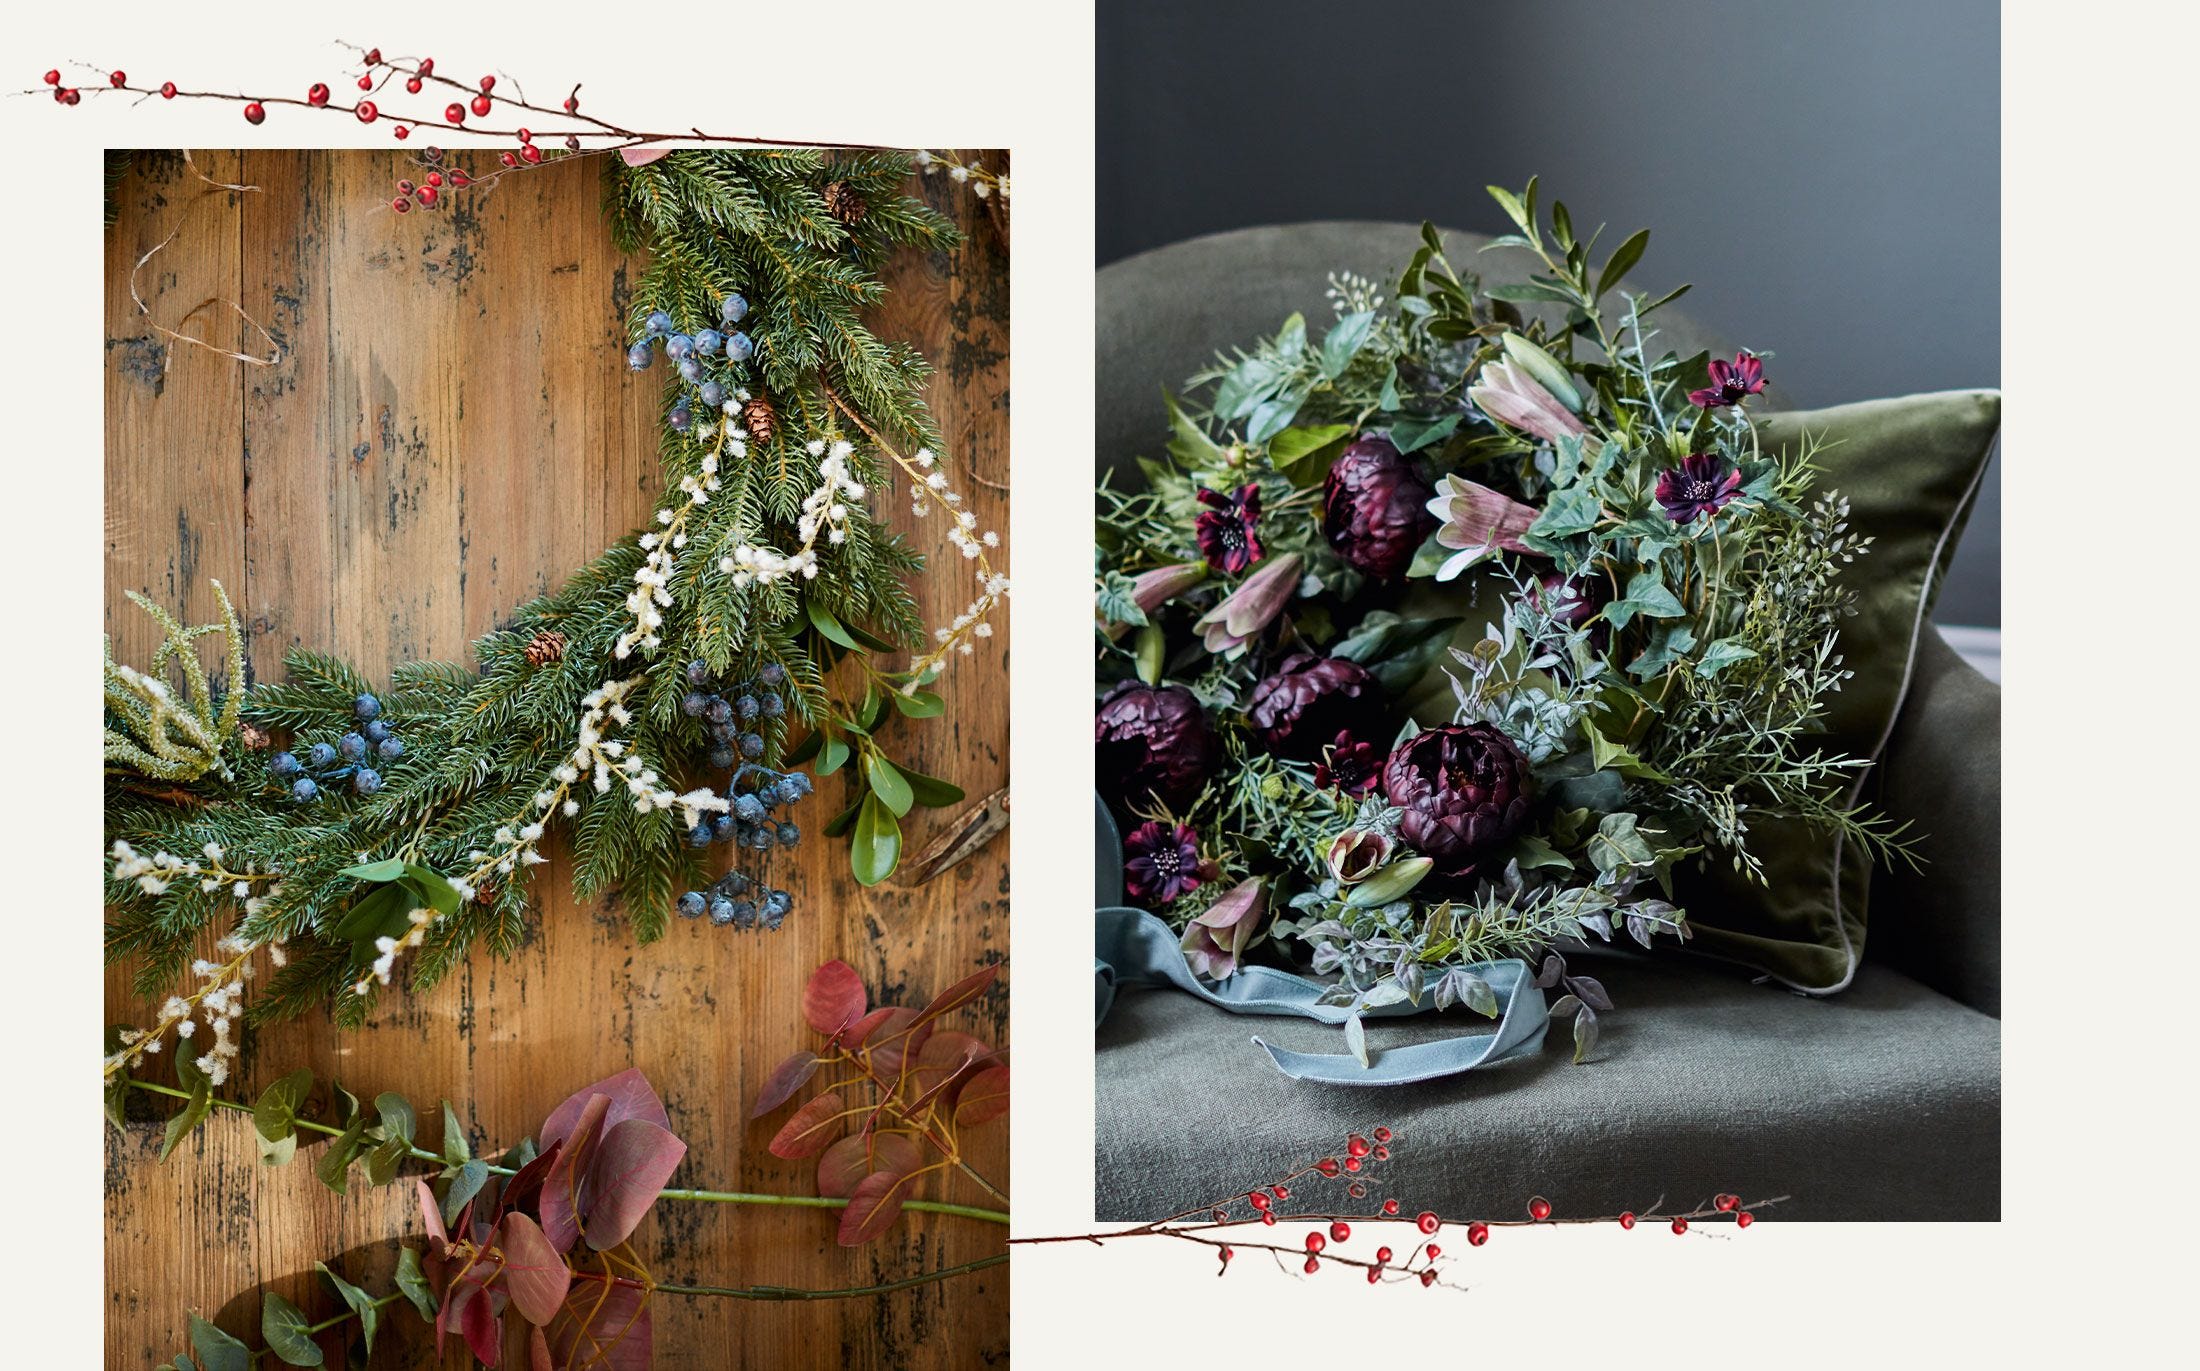 Two images; on the left, a close-up of a festive wreath being made; on the right, a close-up of a ready-made faux wreath sitting on a green armchair.